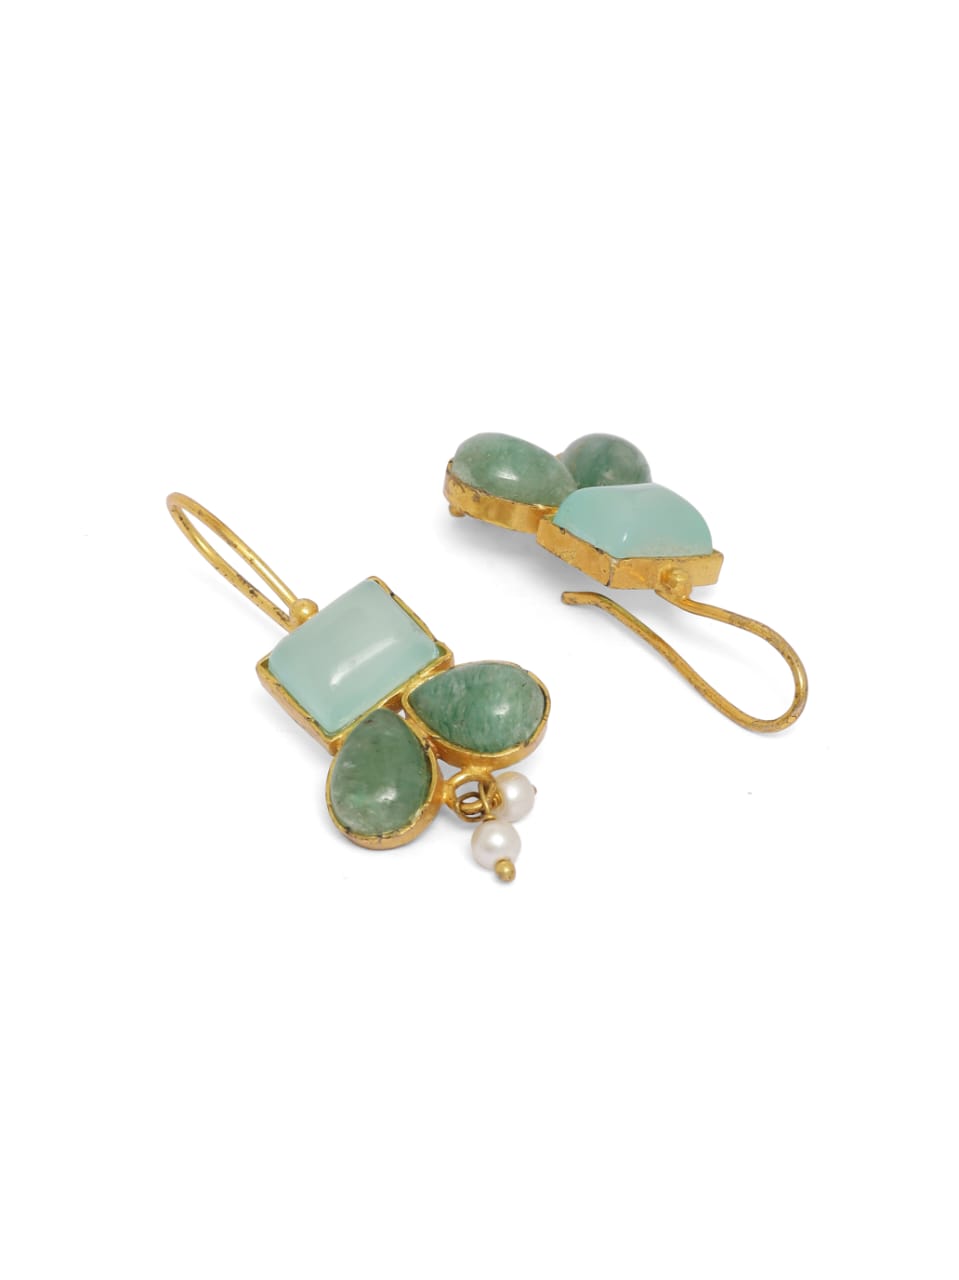 92.5 sterling Silver aqua chalcy grapes aventurine with pearl hook earrings.